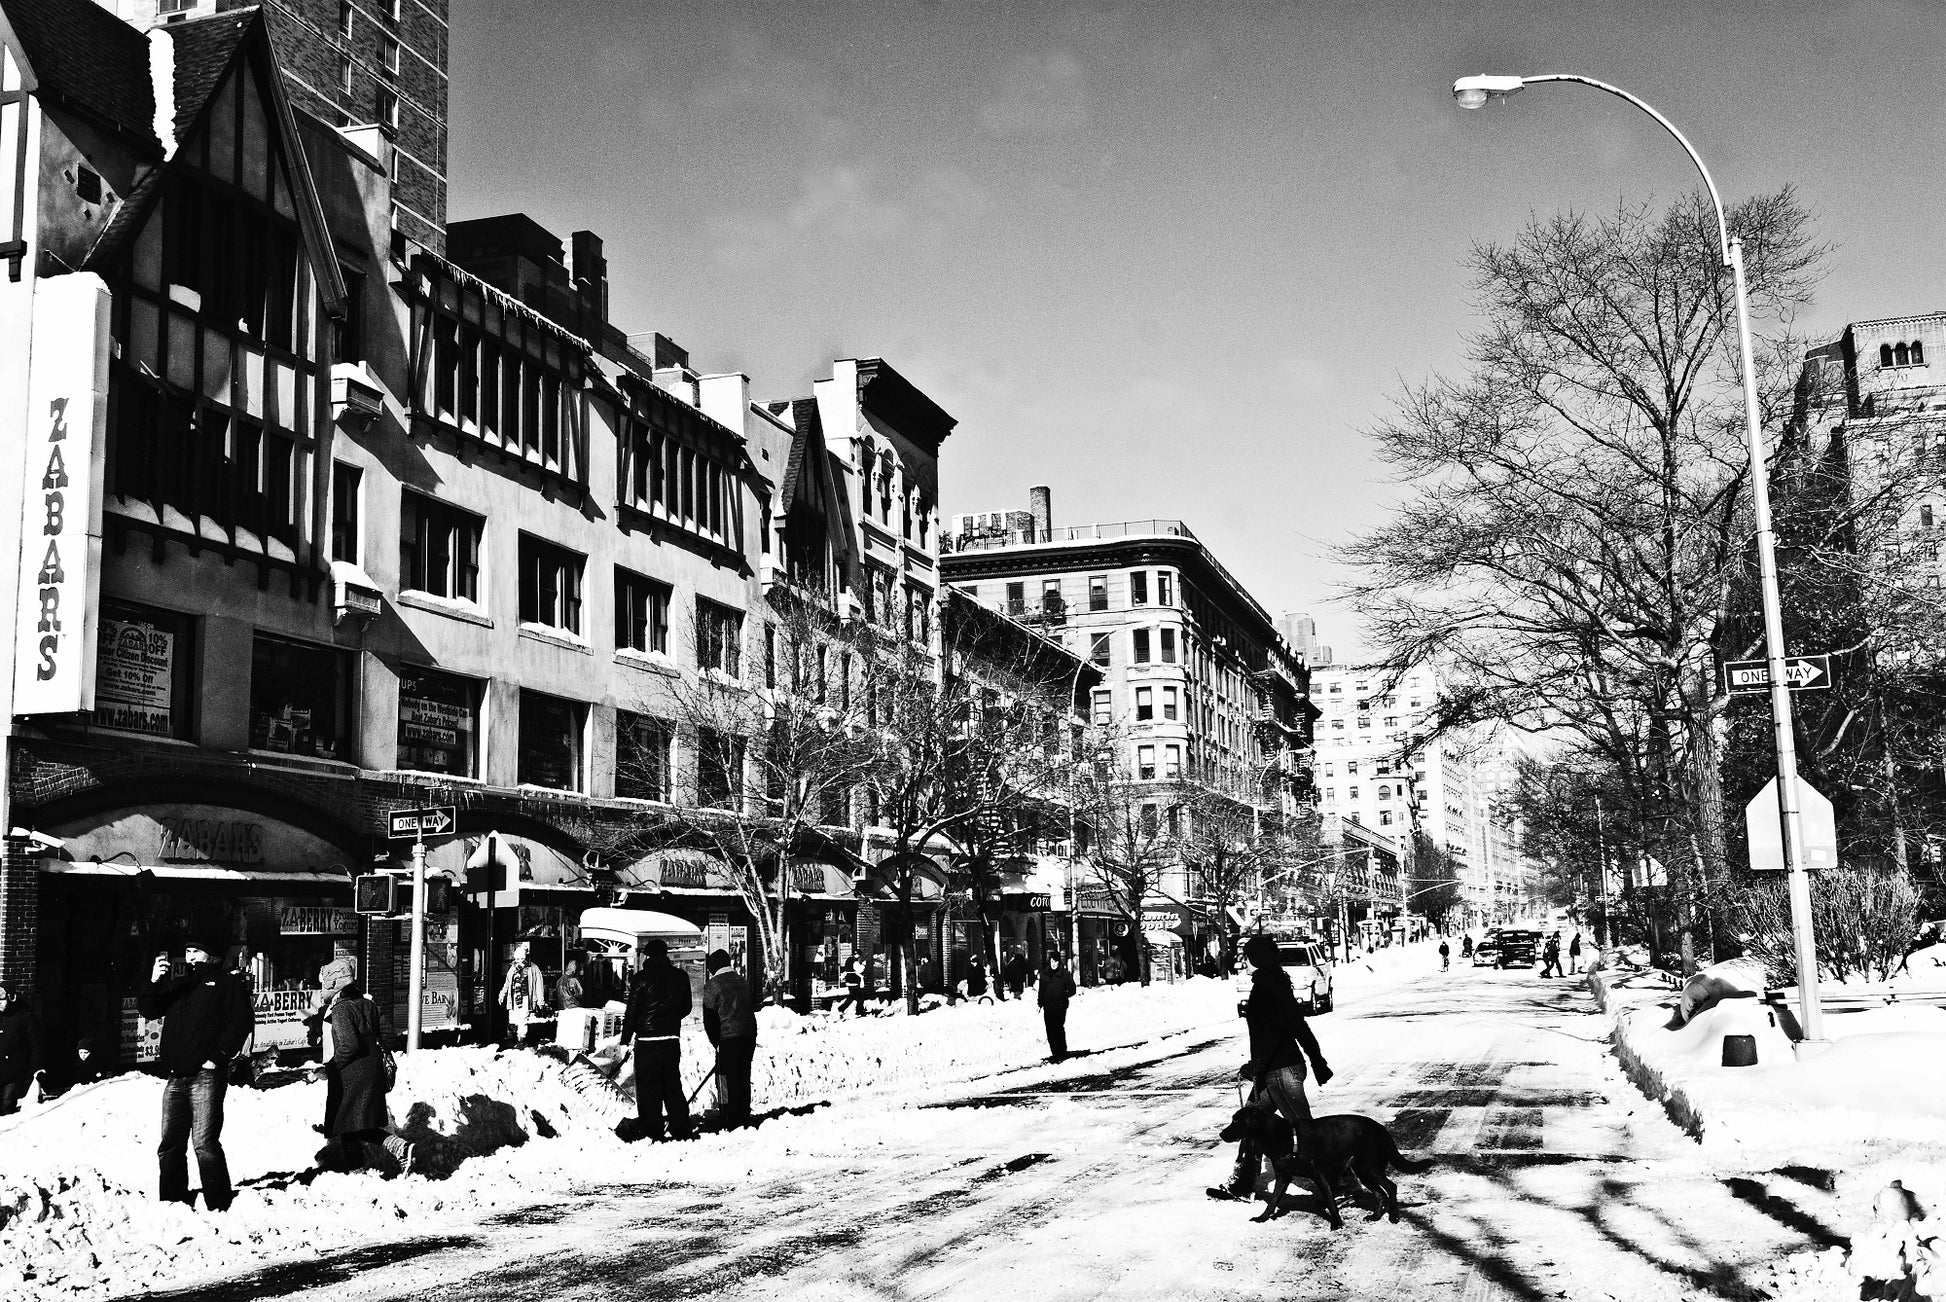 Alessandra Mattanza | CROSSING, Upper West Side, New York. Zabars deli, the Upper West Side on a winters day. Available as a photographic print on acrylic glass.